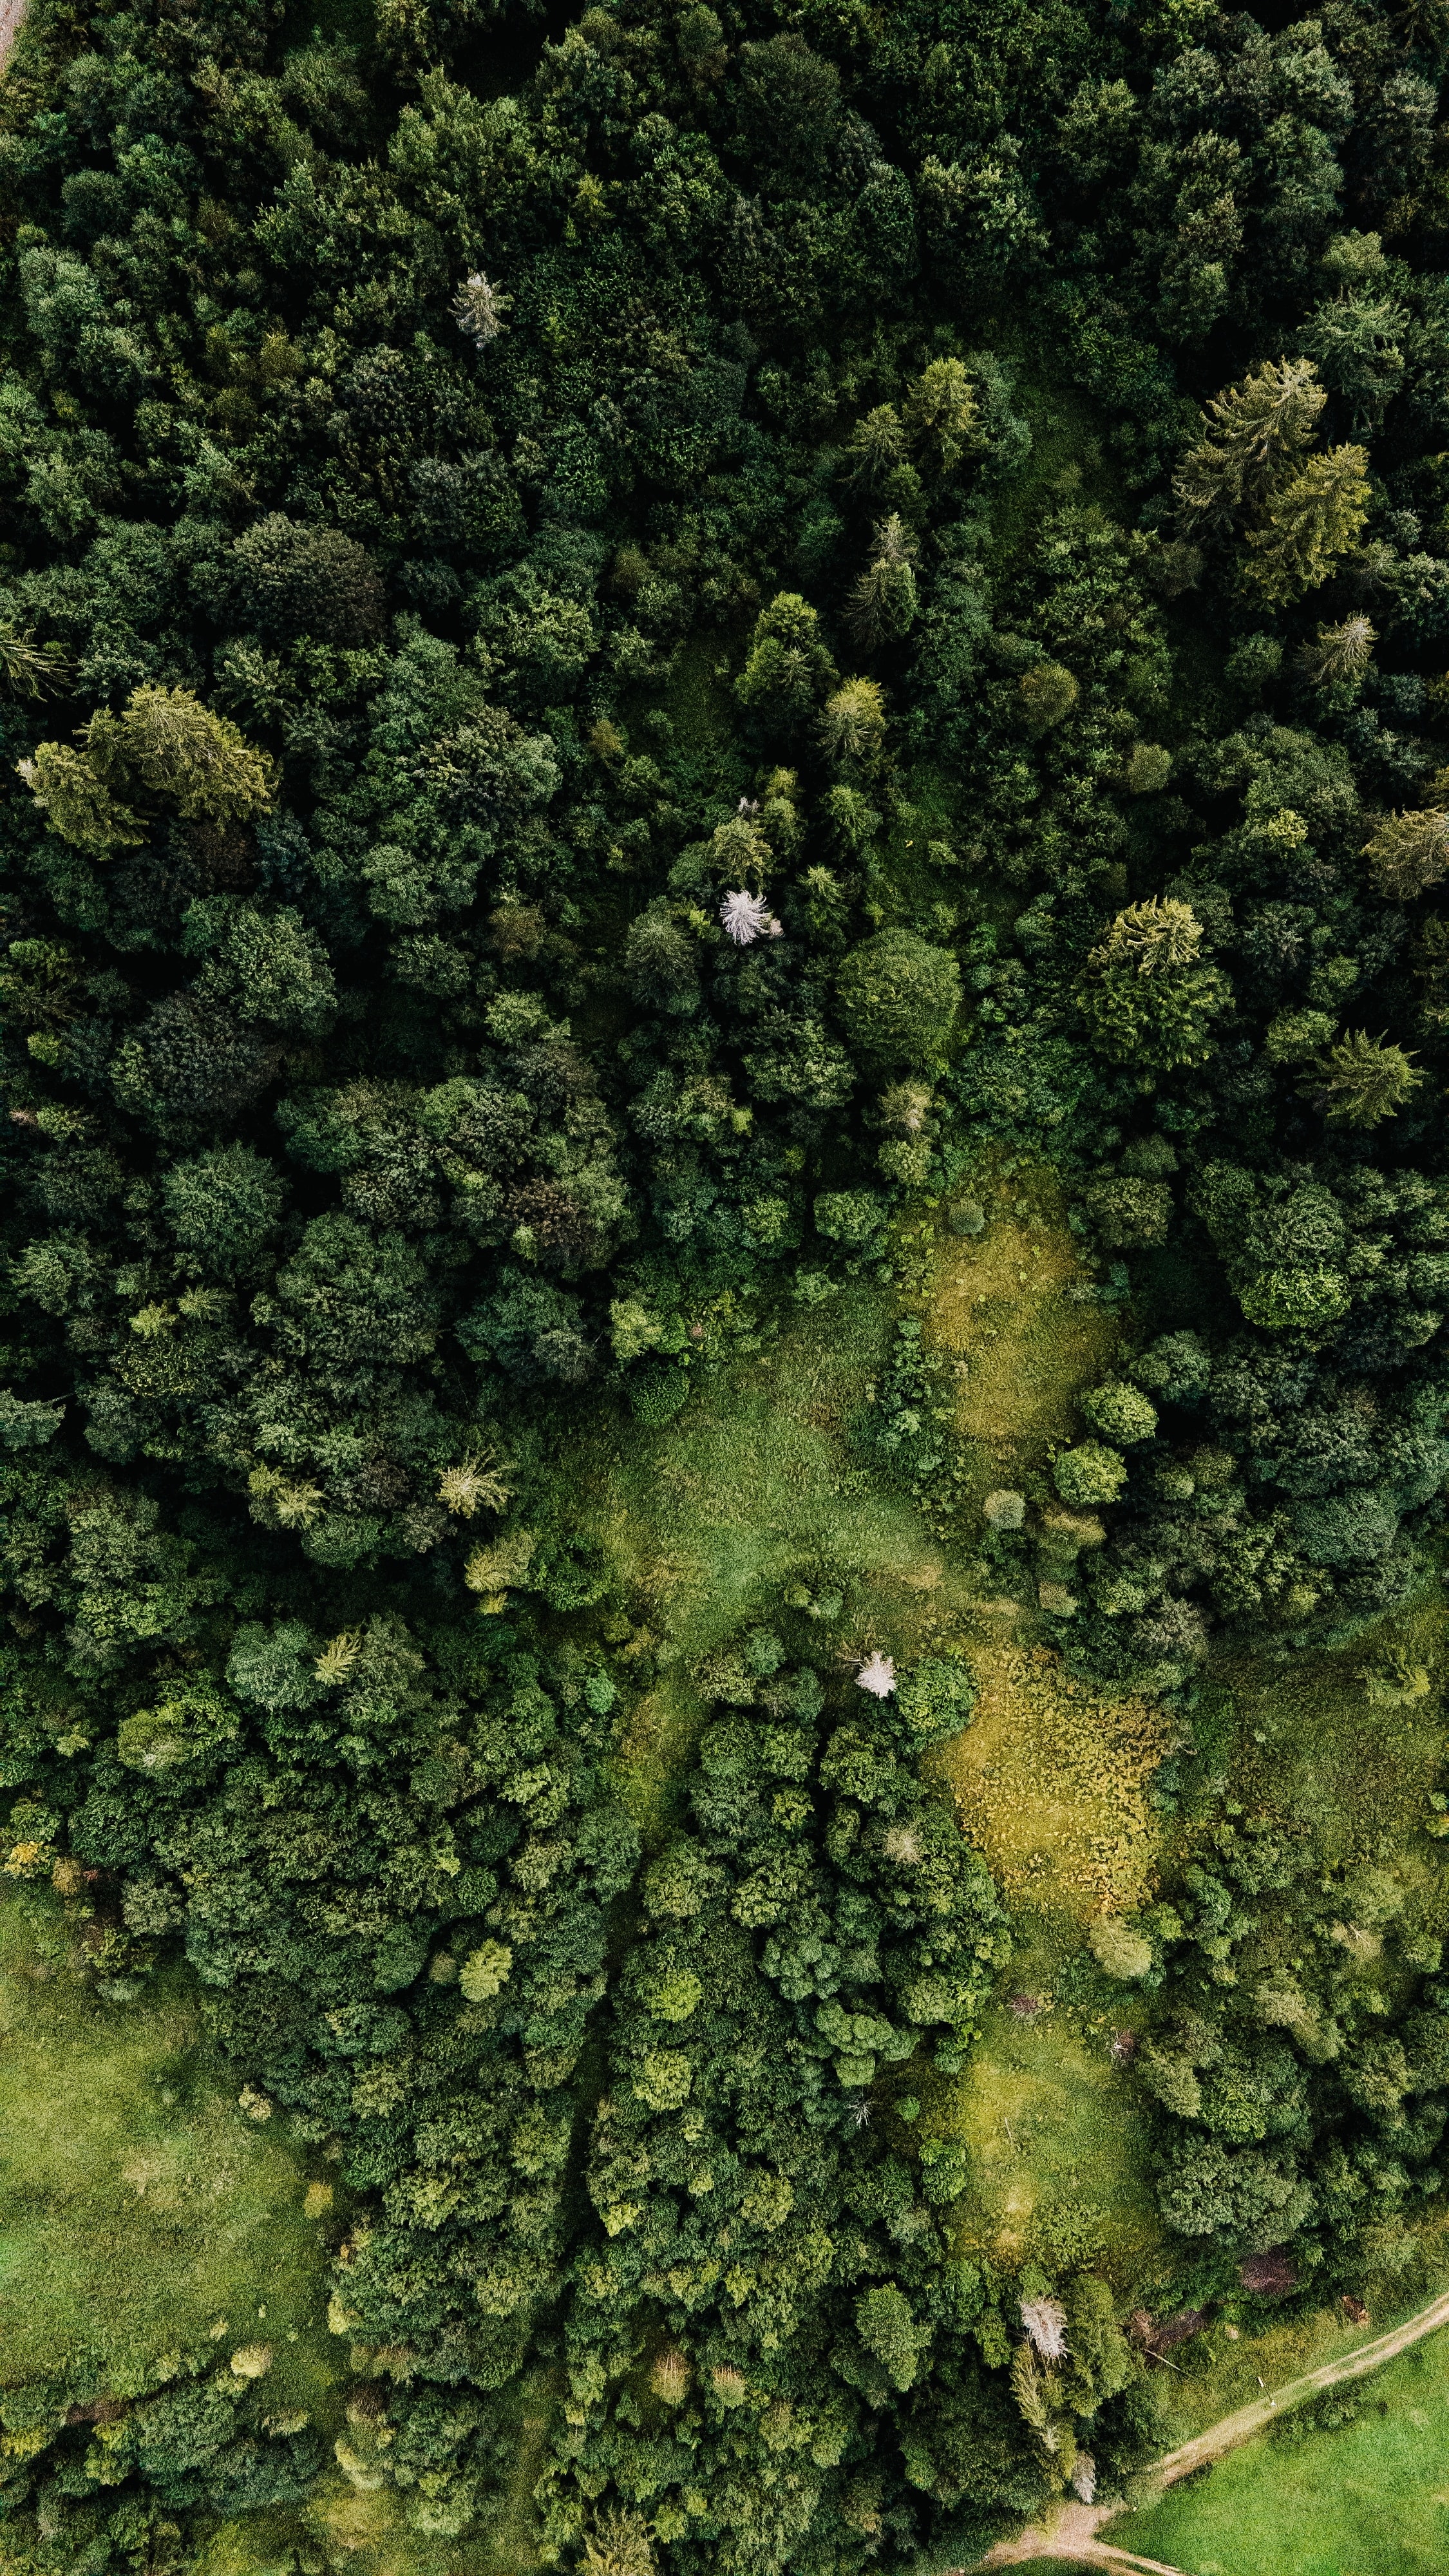 view from above, green, nature, trees, forest, path, paths